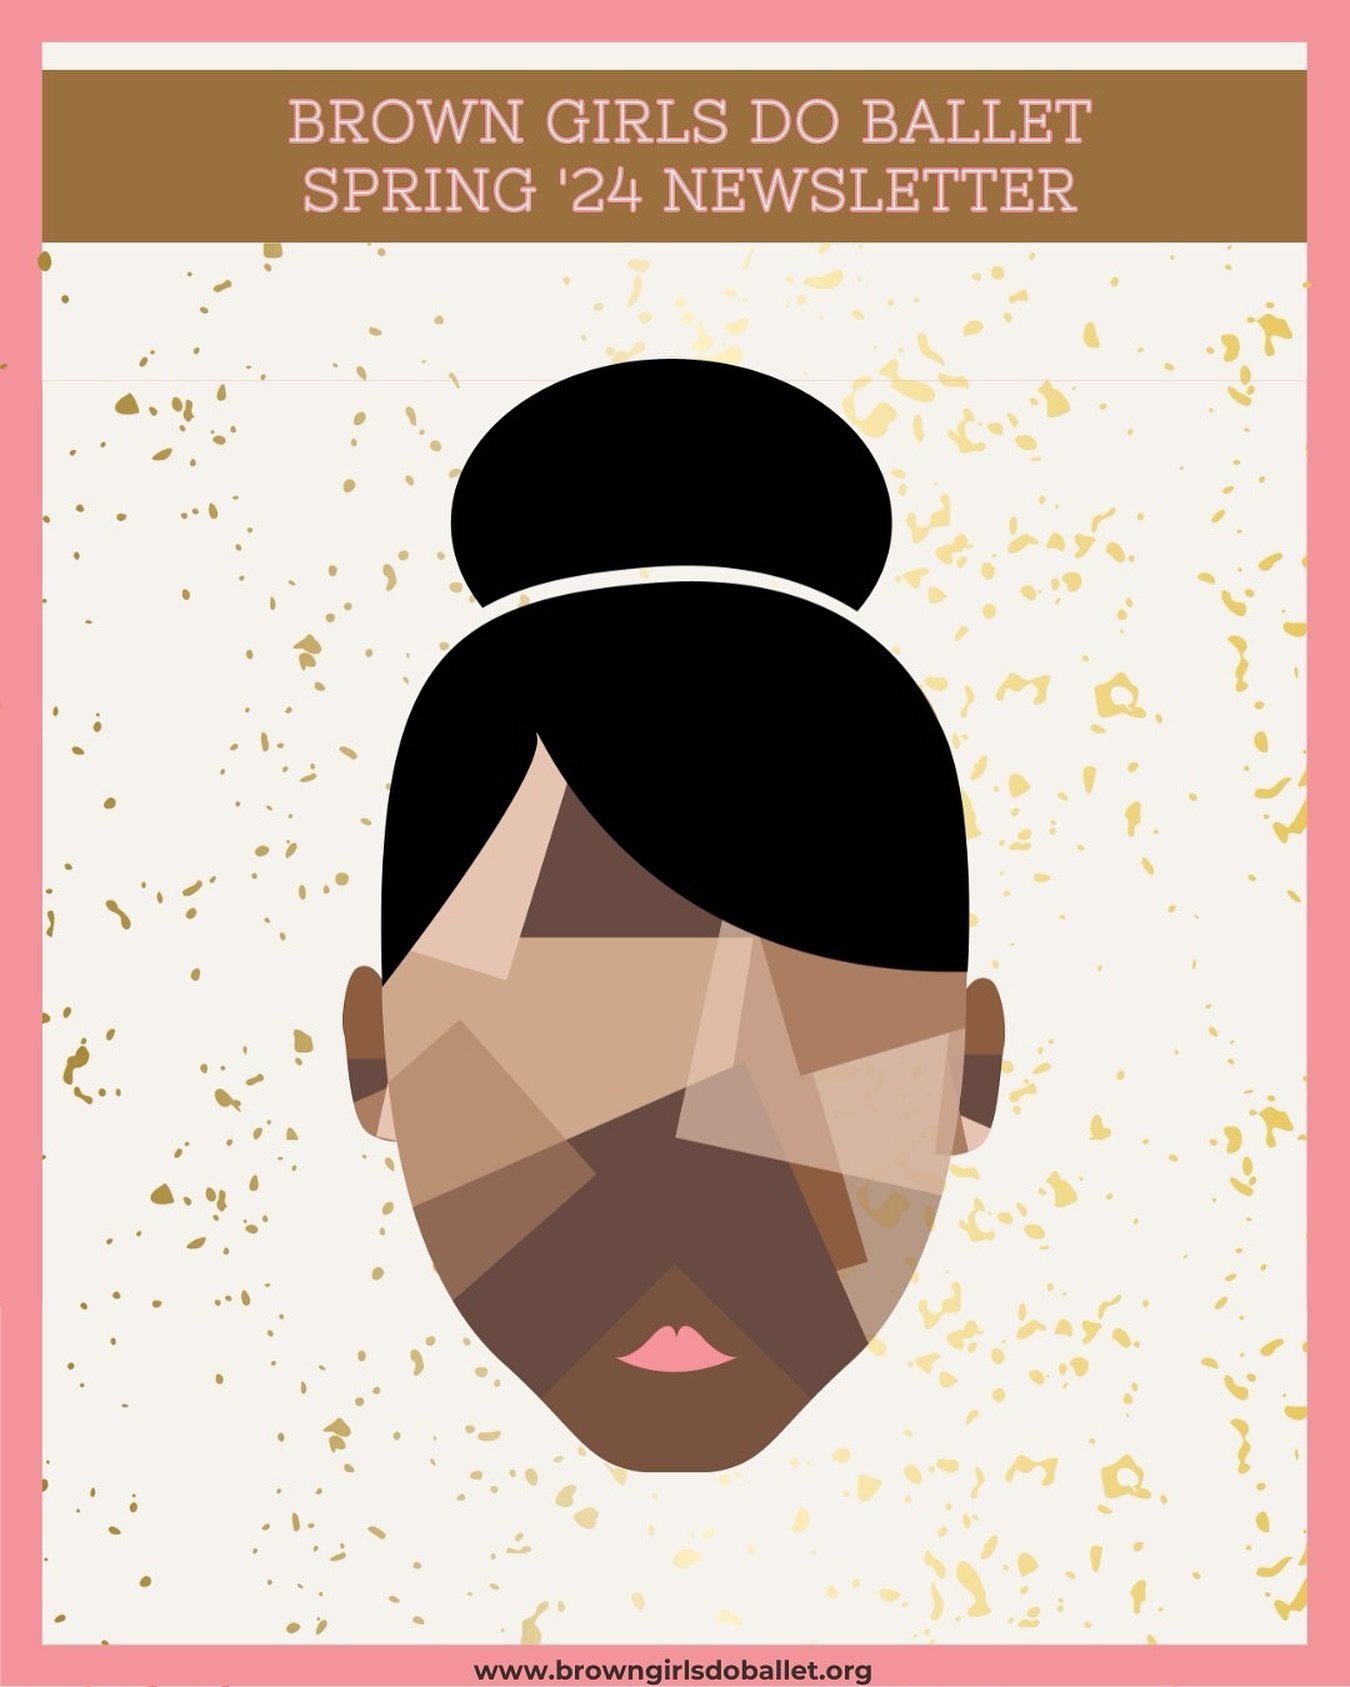 Another season, another newsletter! Check out the latest BGDB Spring &lsquo;24 Newsletter posted on our Brown Ballerina Blog. This month&rsquo;s issue will discuss articles about tips for preparing for the dance season, a guide to developing a dancer